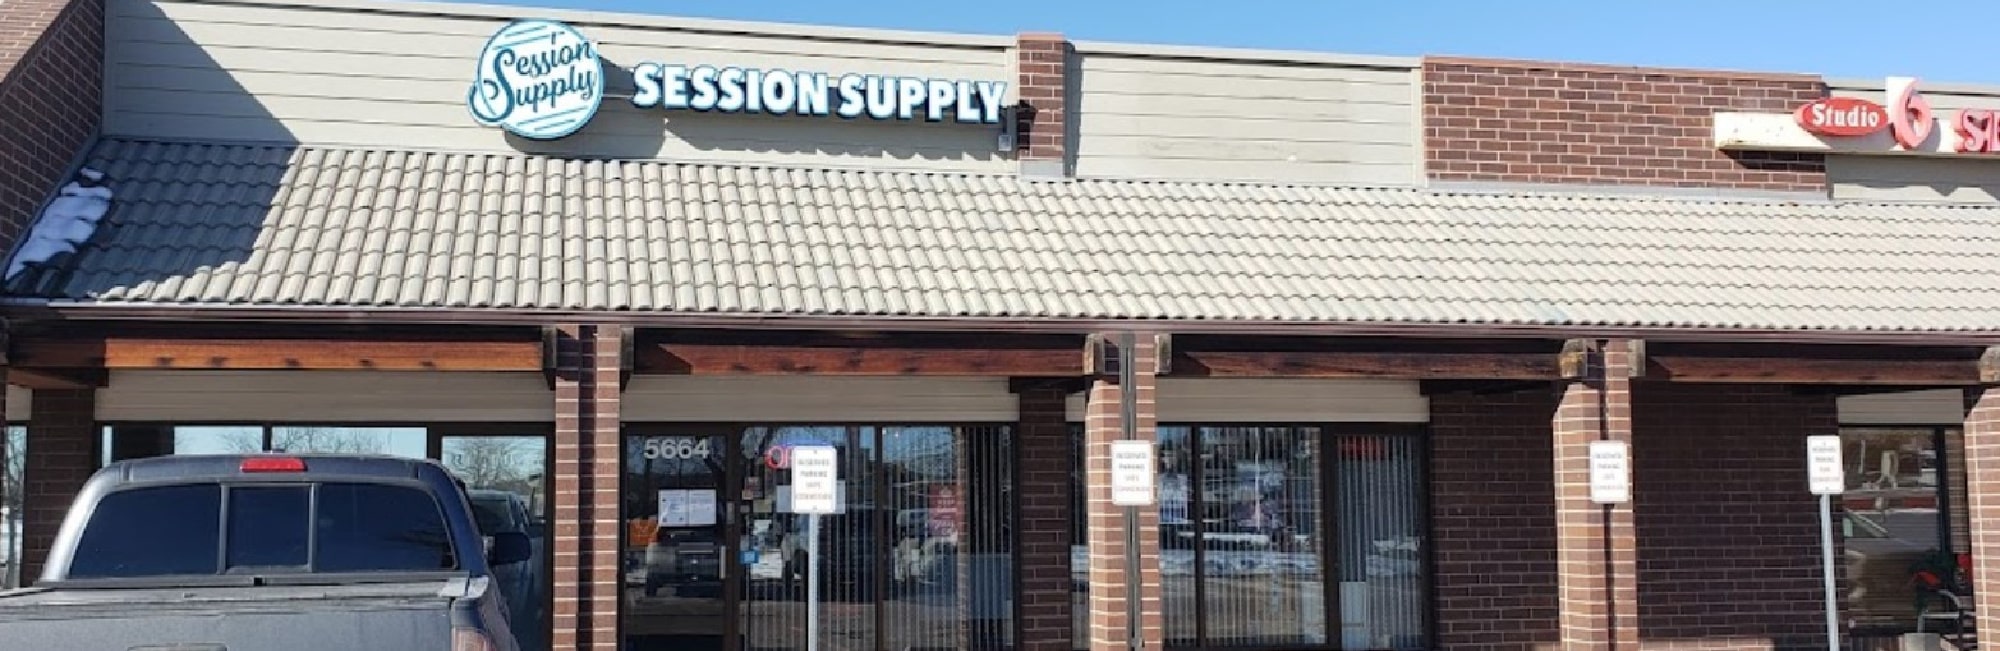 image of session supply in colorado springs